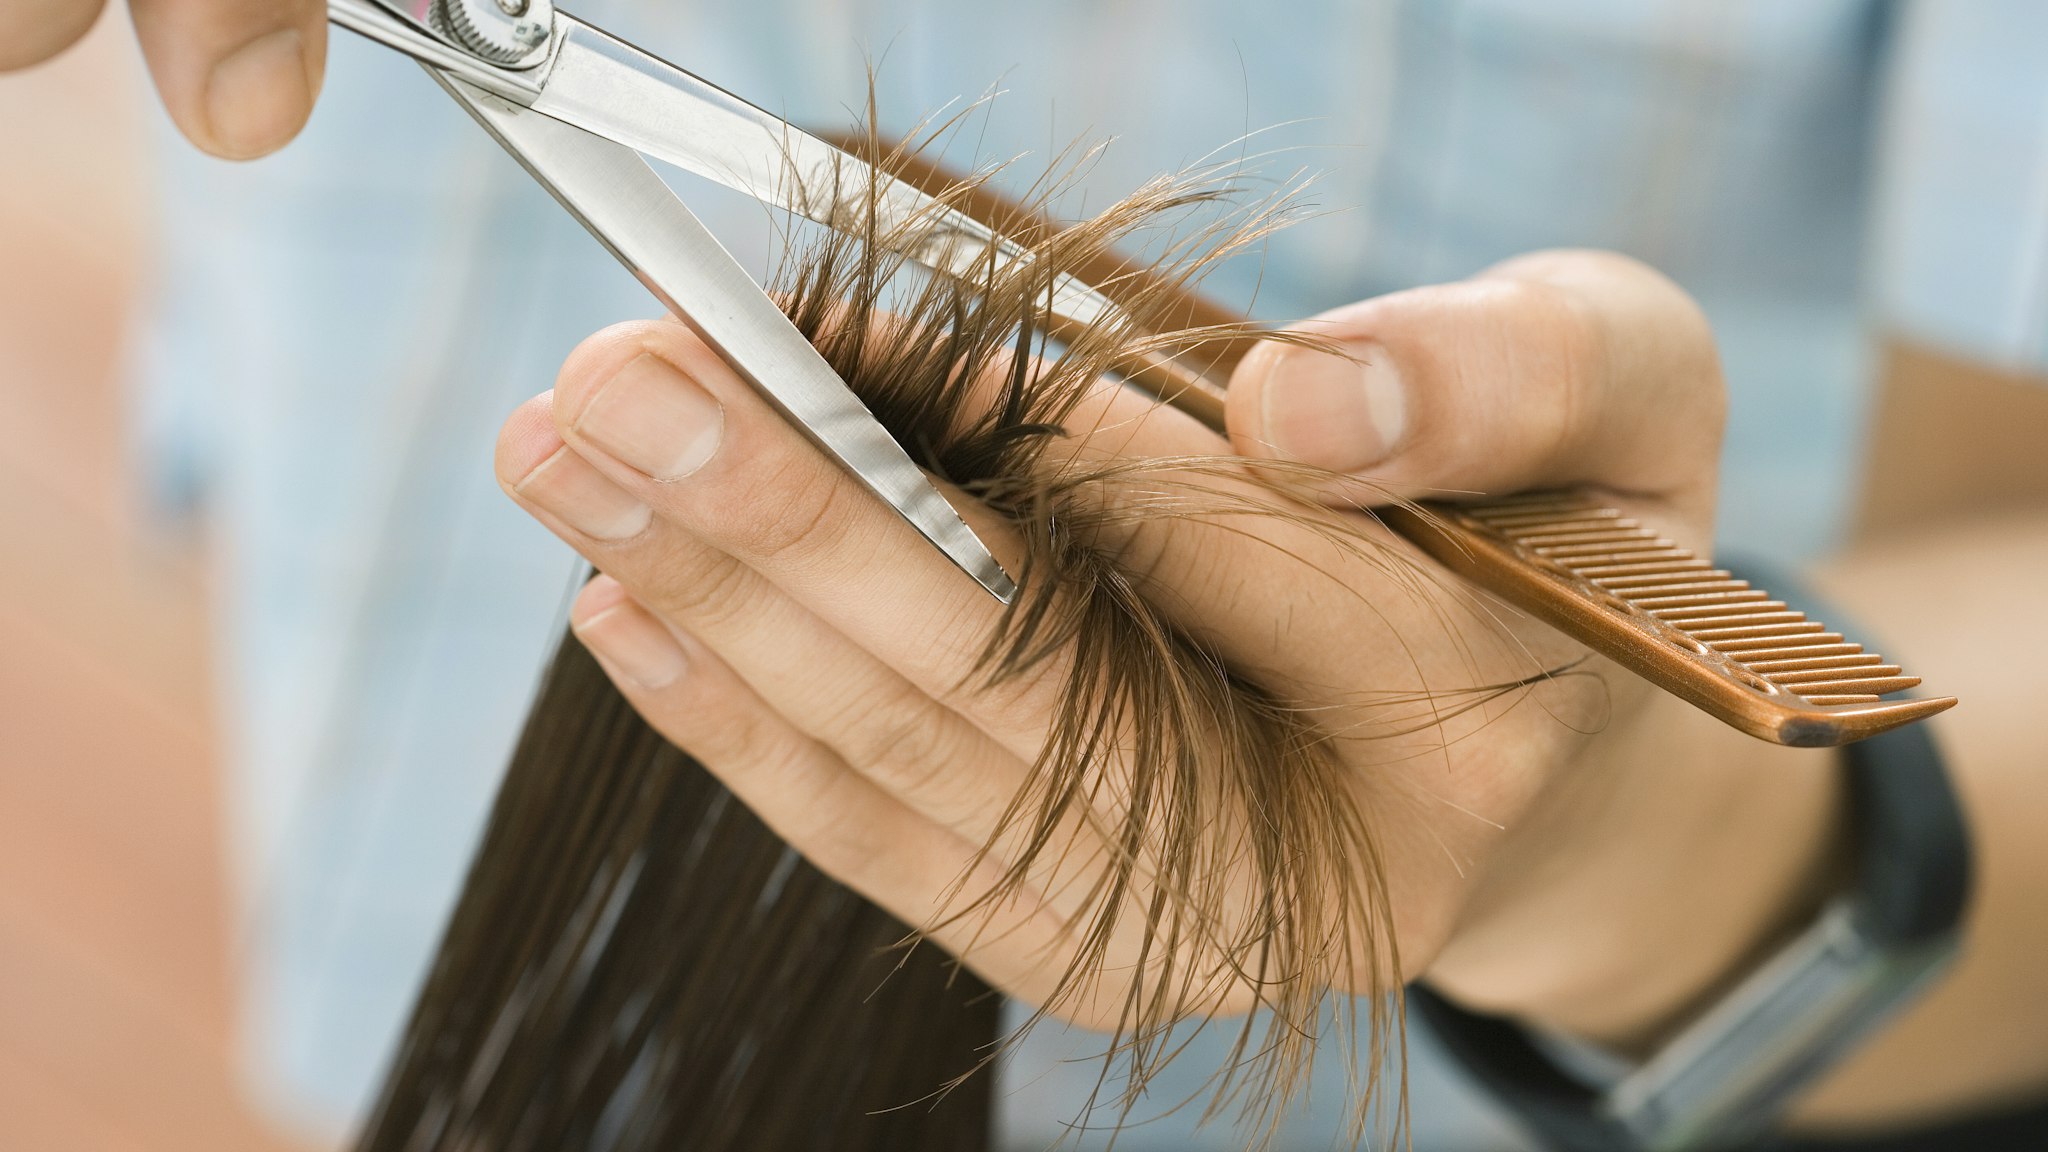 Hairdresser cutting woman's hair in salon, focus on hair, hands and scissors, close-up